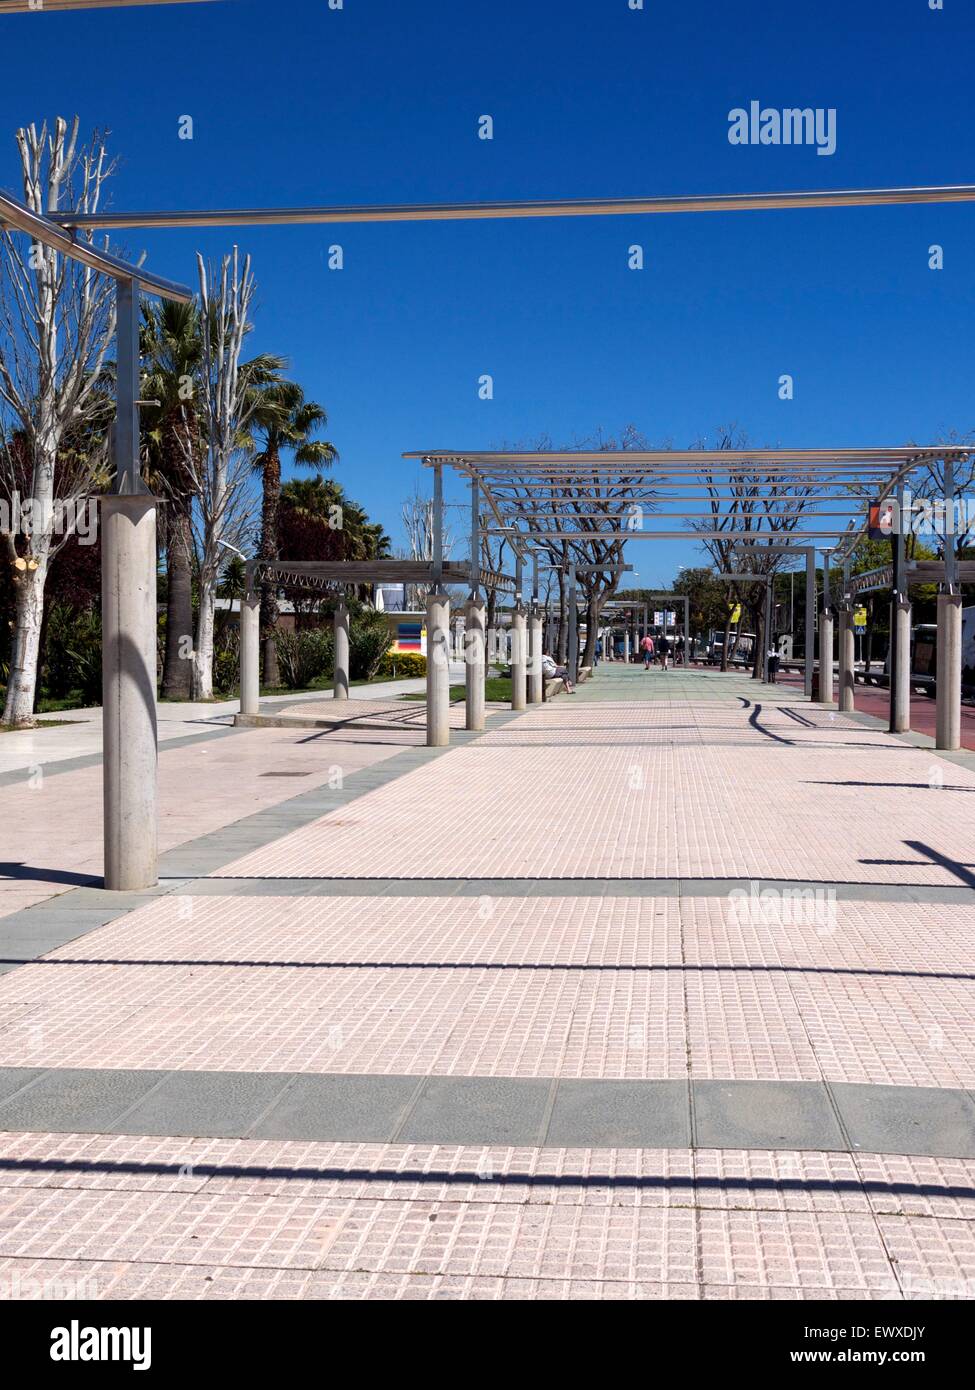 Promenade in a holiday resort in Spain Stock Photo